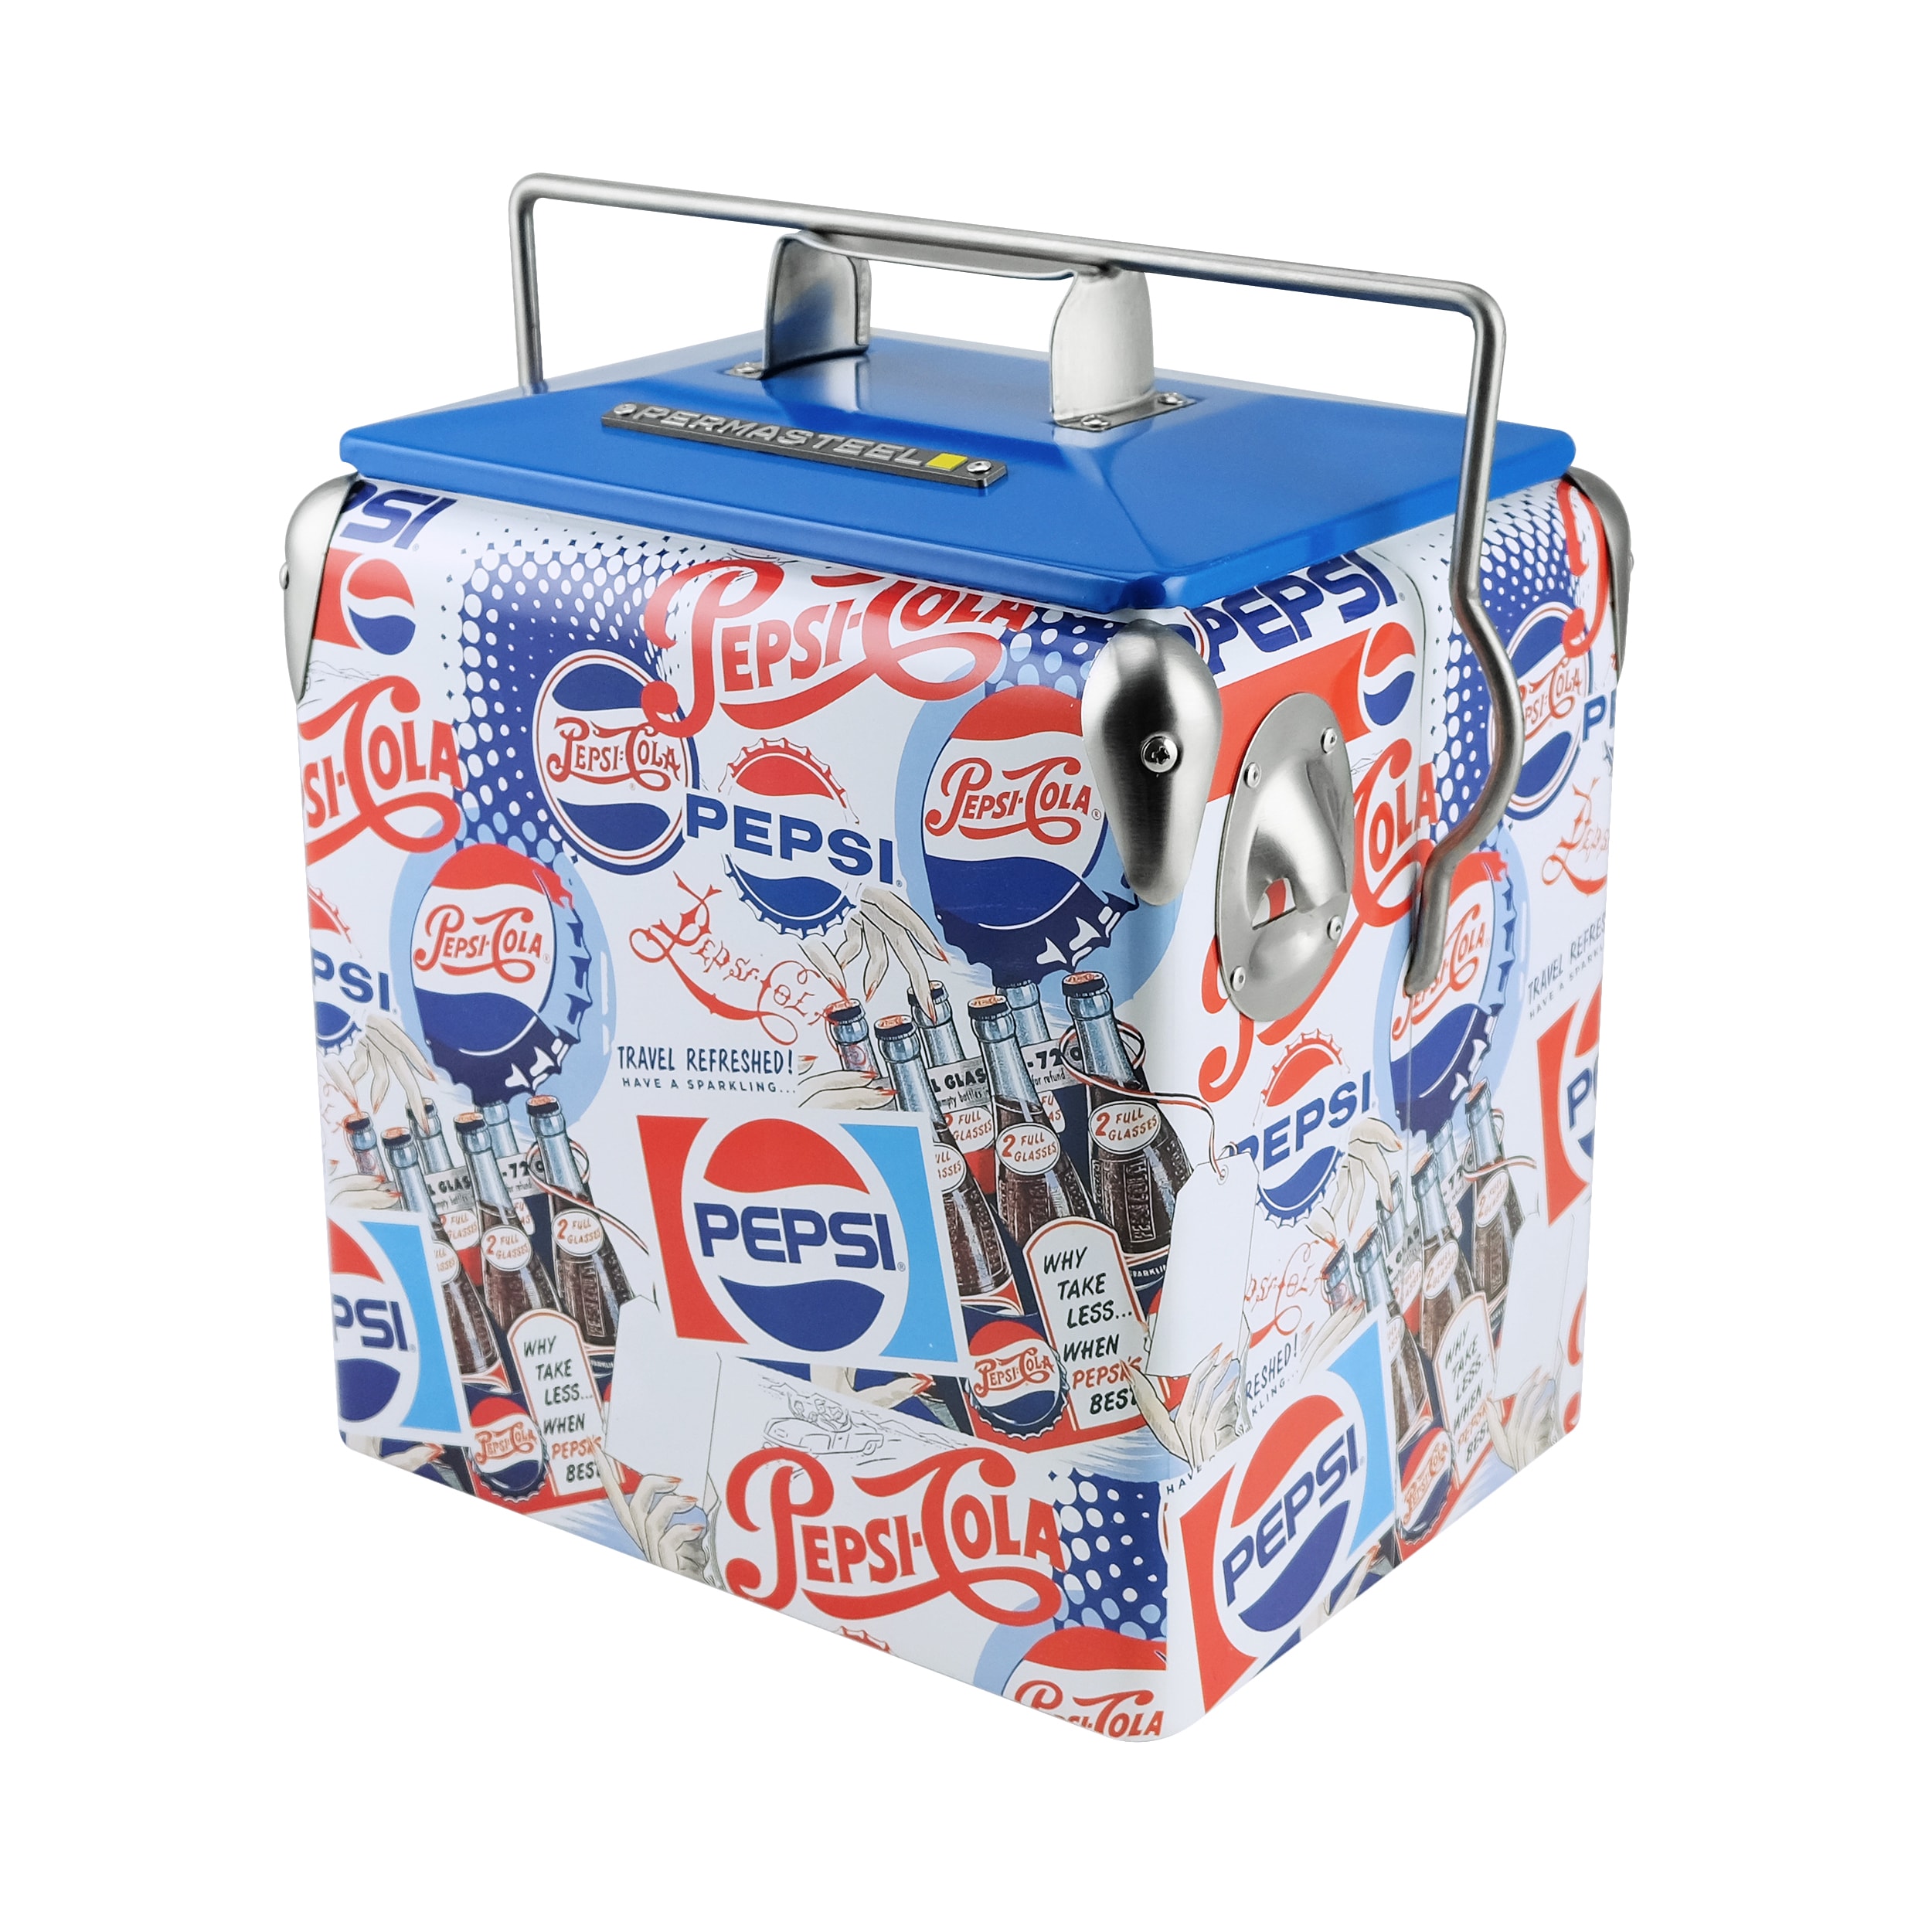 RTIC Halftime Cooler Review: The Classic Field Sports Water Cooler